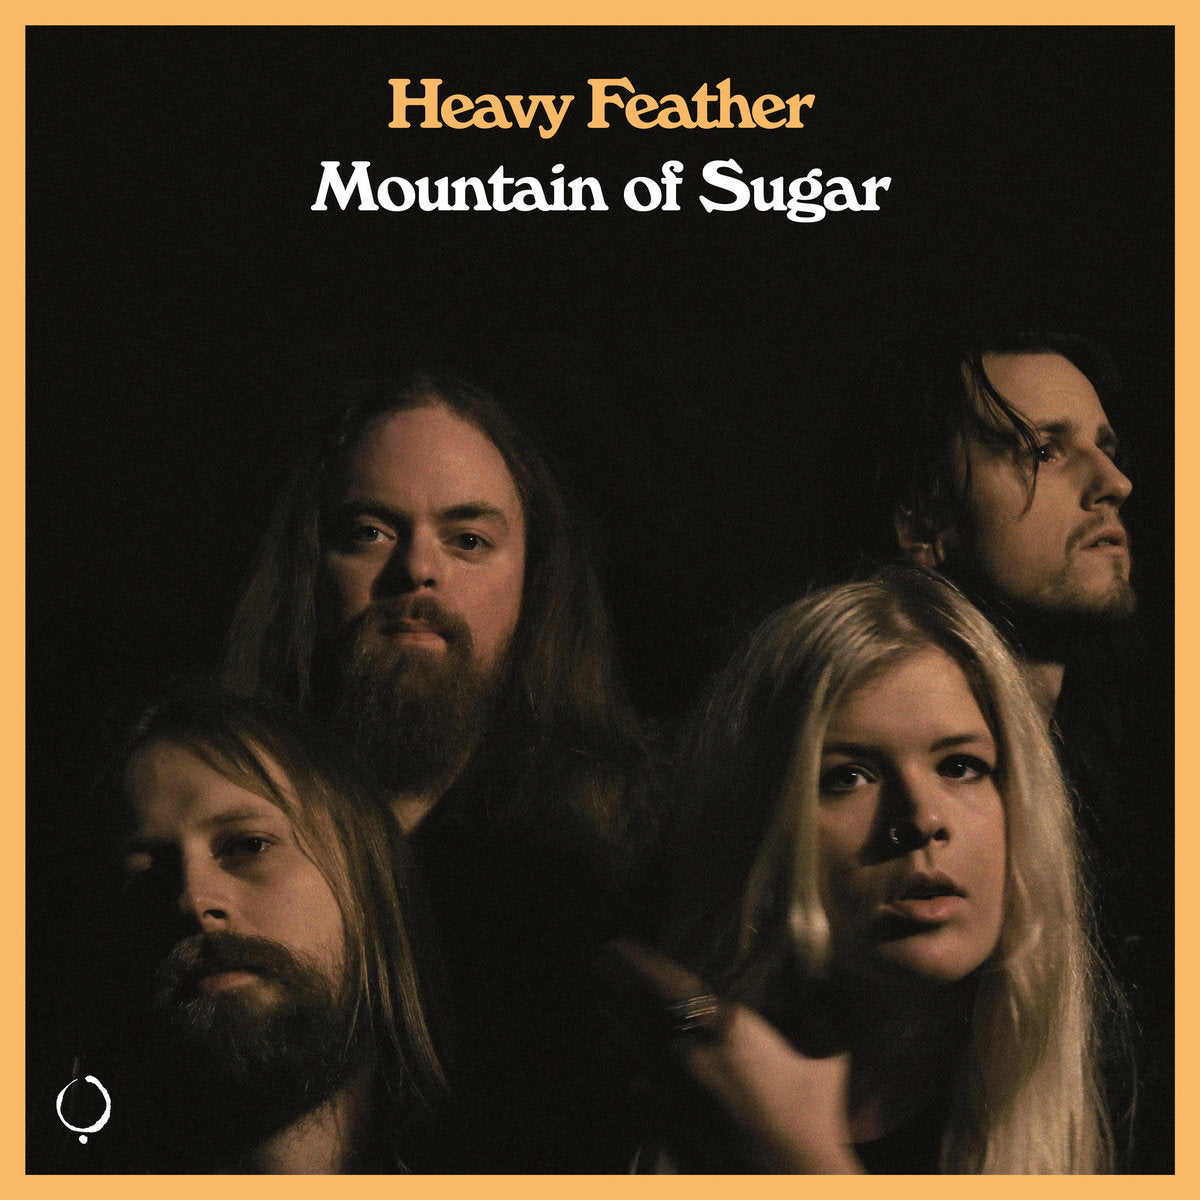 Heavy Feather - Mountain of Sugar LP (Limited White Vinyl)